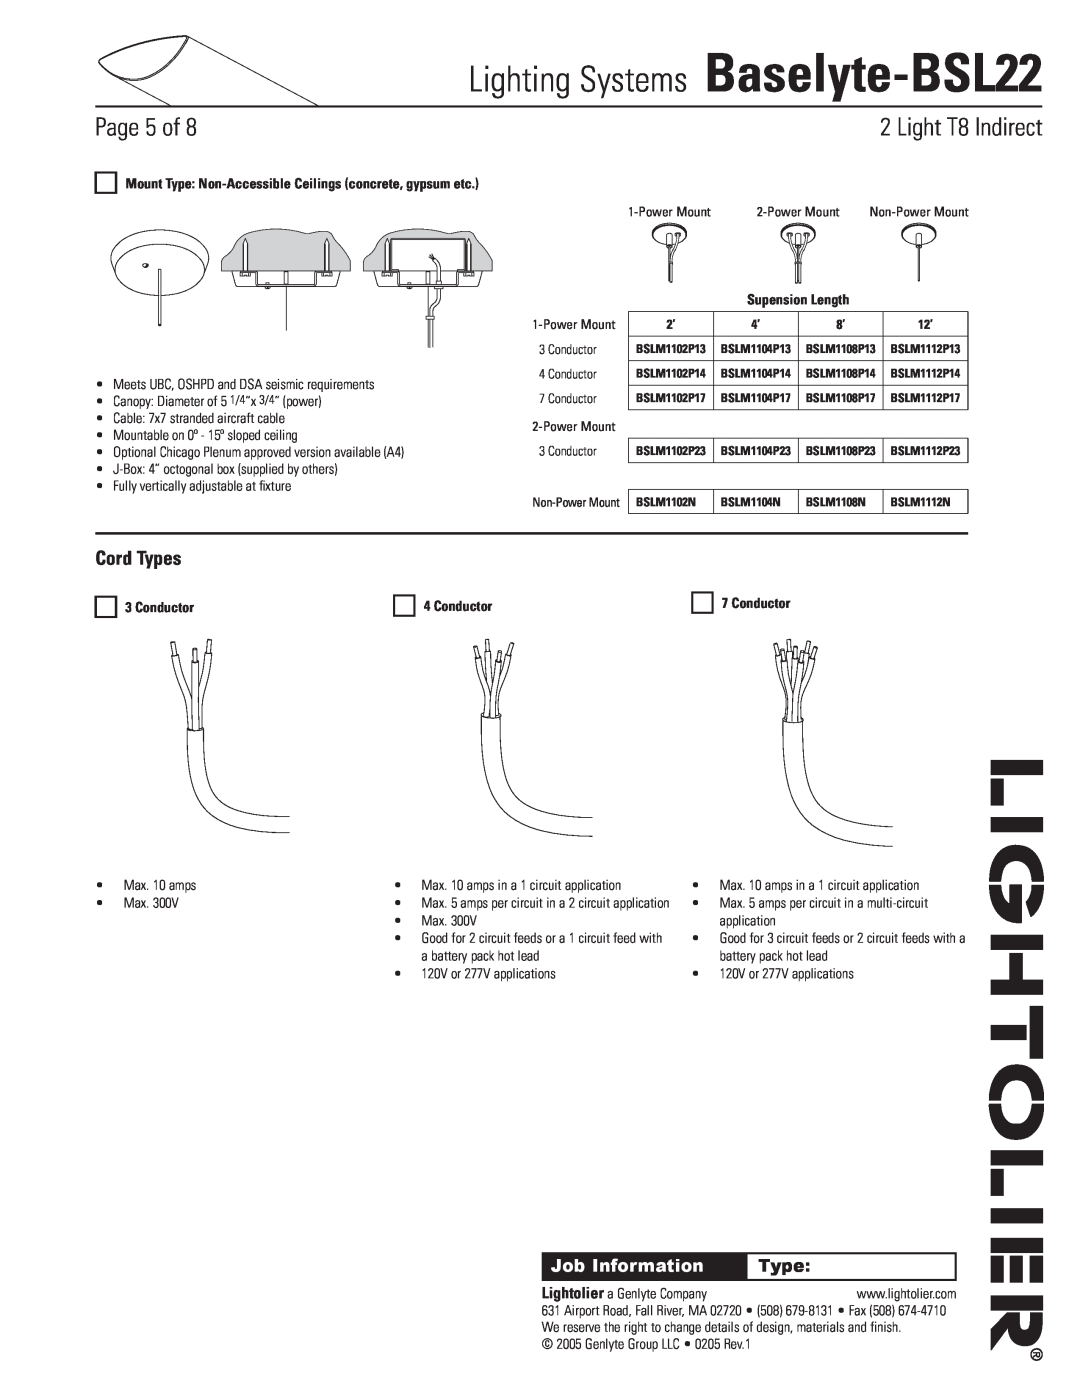 Lightolier Cord Types, Conductor, Lighting Systems Baselyte-BSL22, Page of, Light T8 Indirect, Job Information 